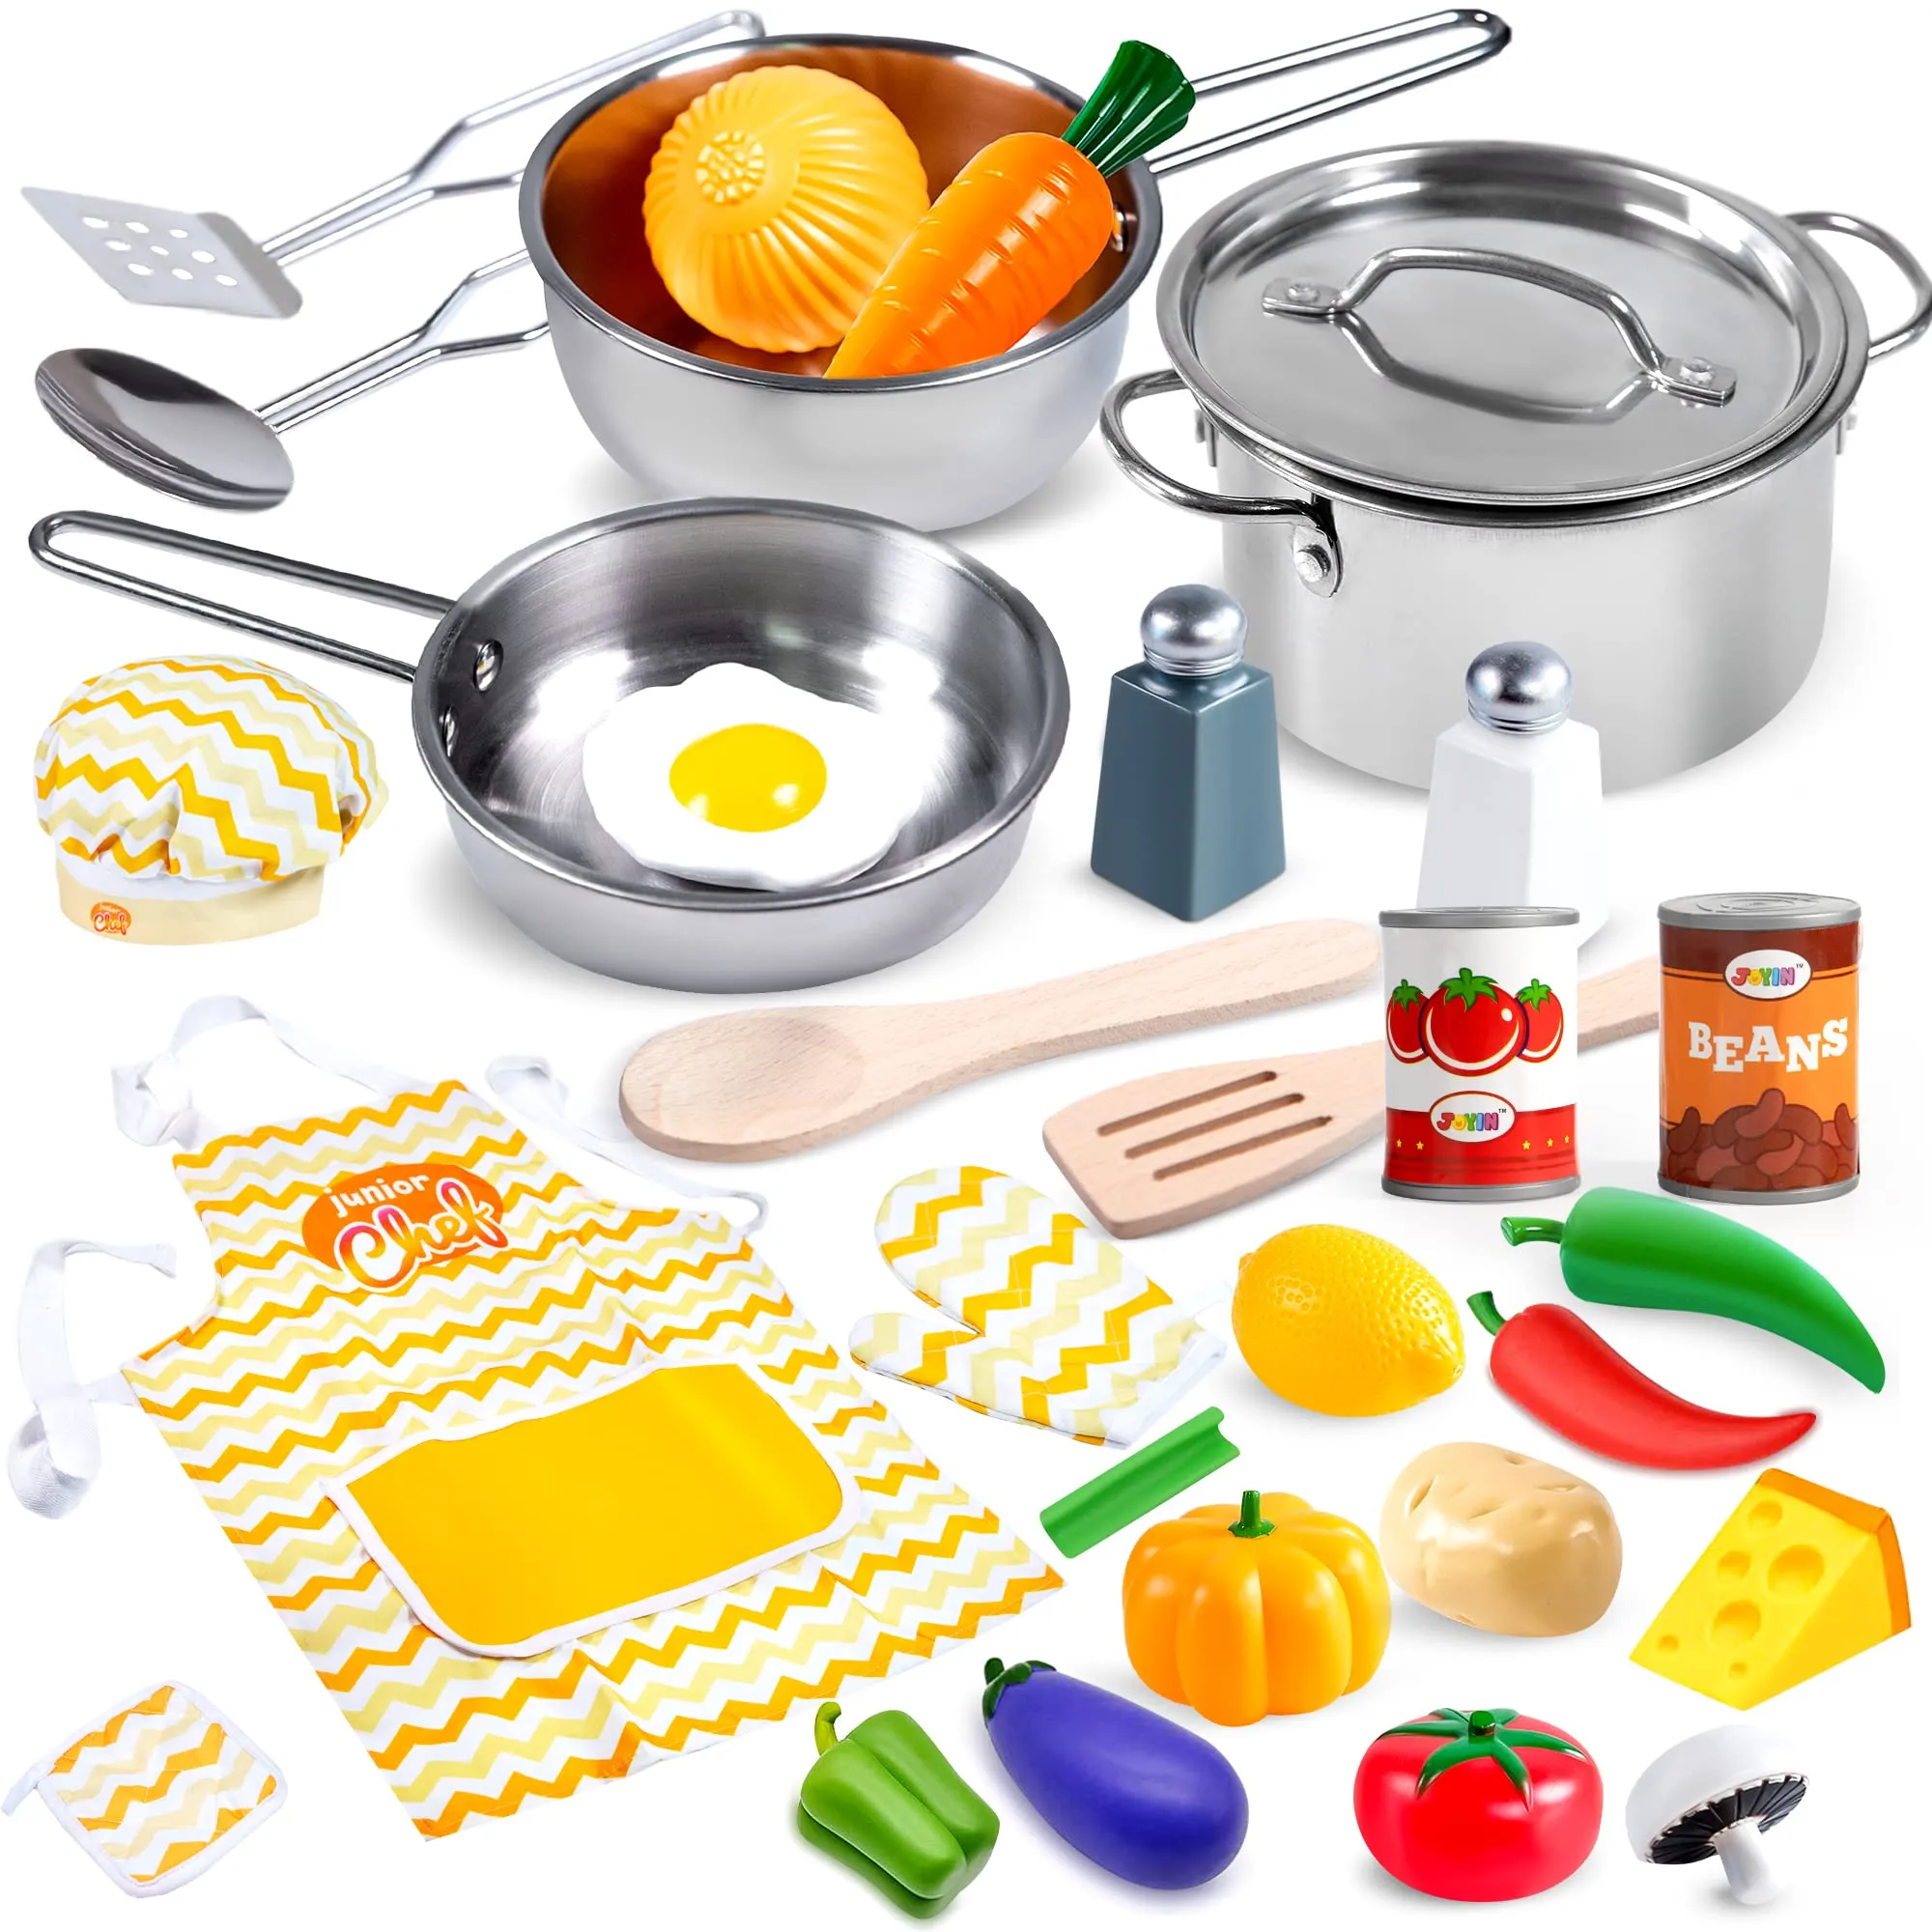 Pretend Play Kitchen set for Kids | Little Chef kids kitchen playset with  Accessories Pots, Pans, dishes, cups, utensils, food toys with Adorable